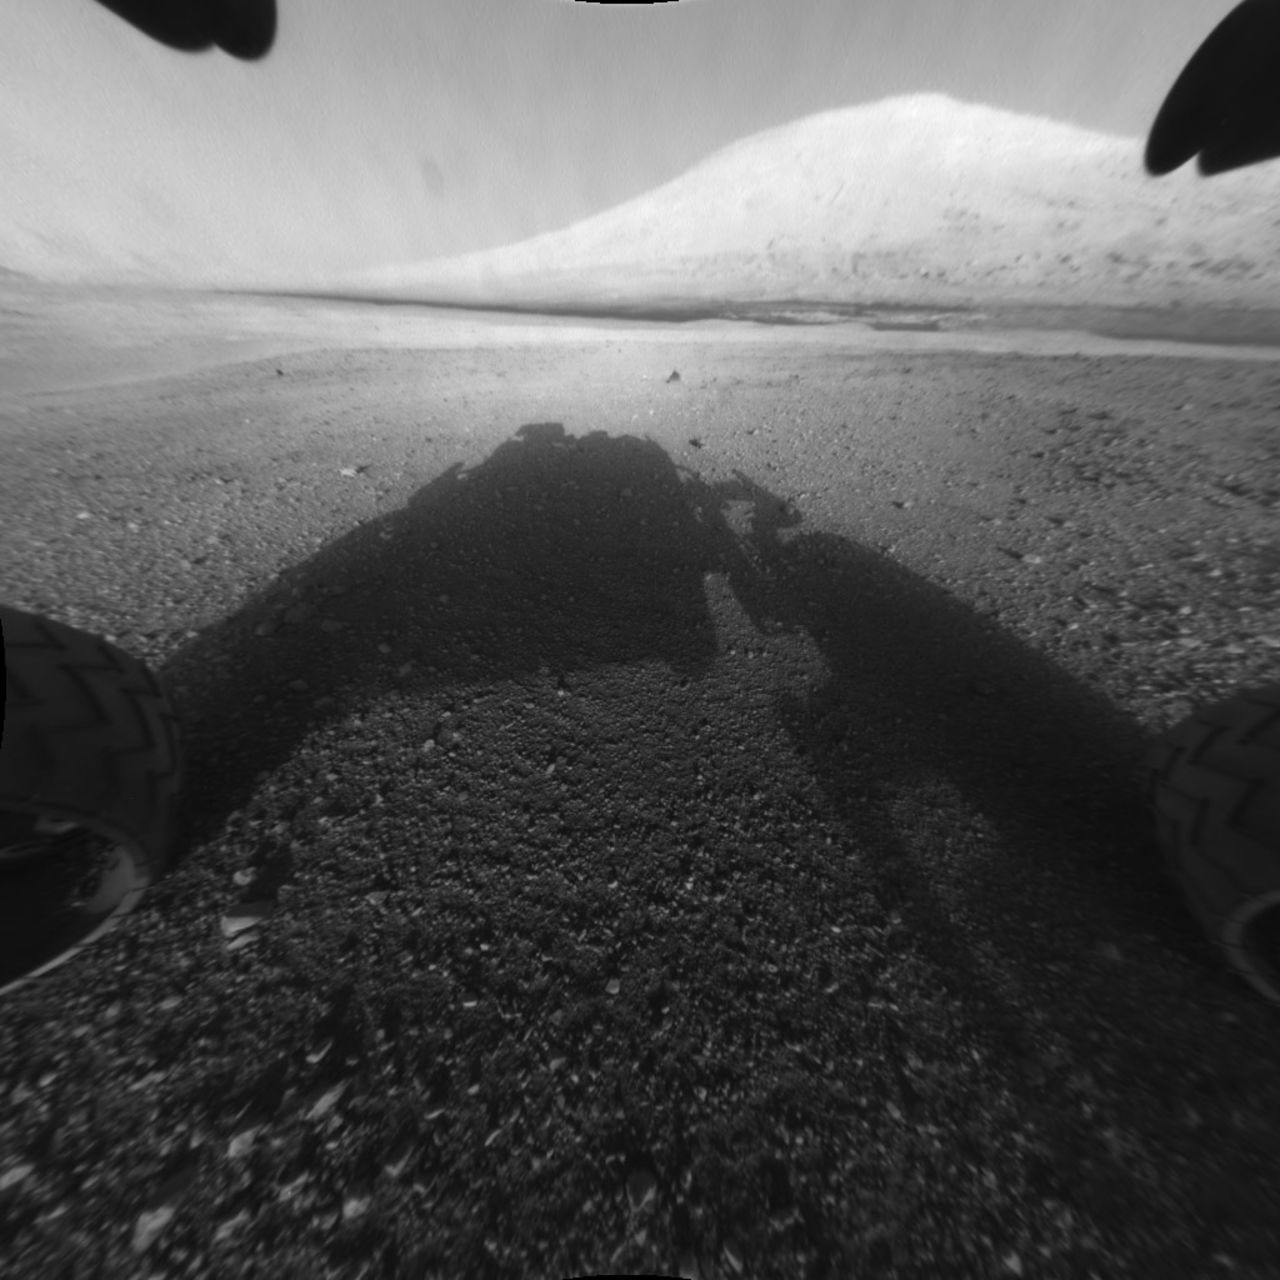 This image shows Curiosity's main science target, "Mount Sharp." The rover's shadow can be seen in the foreground. The dark bands in the distances are dunes. 